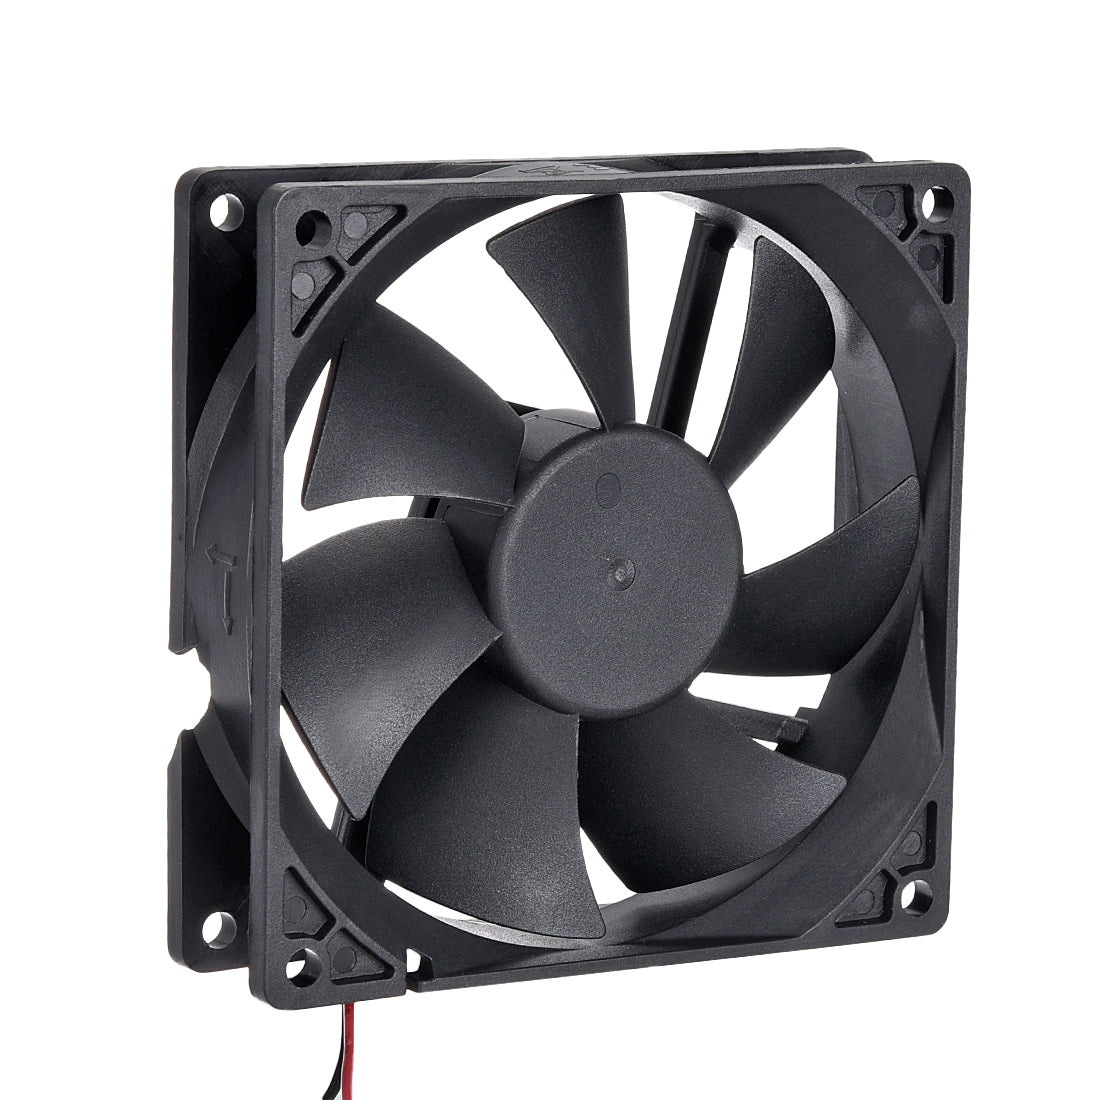 uxcell Uxcell SNOWFAN Authorized 92mm x 92mm x 25mm 12V Brushless DC Cooling Fan #0408